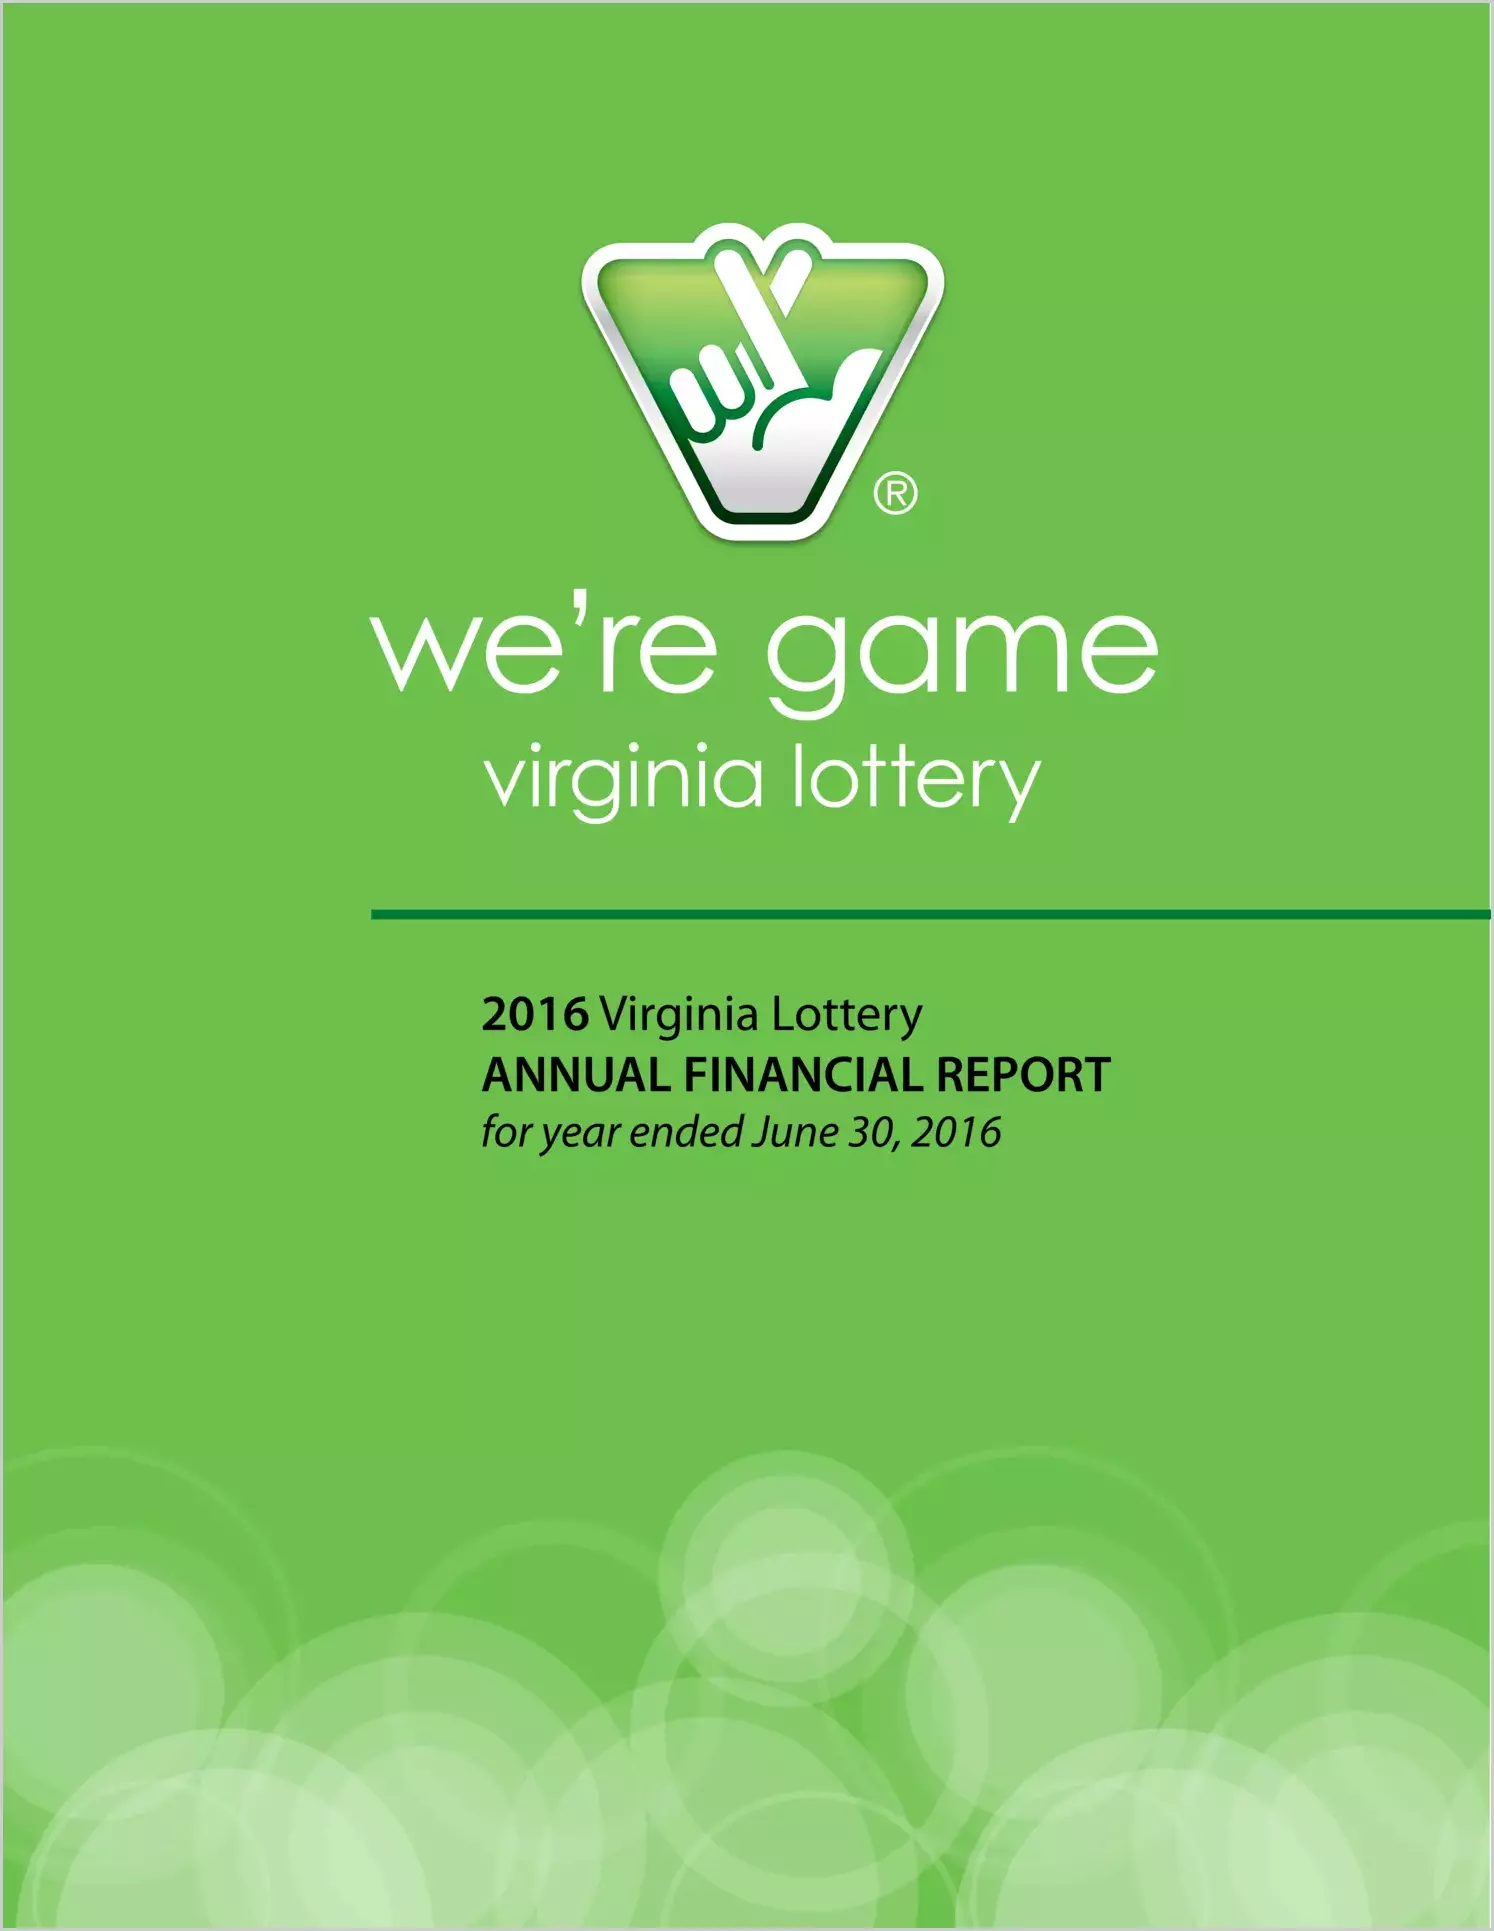 Virginia Lottery Report Financial Statement for the year ended June 30, 2016